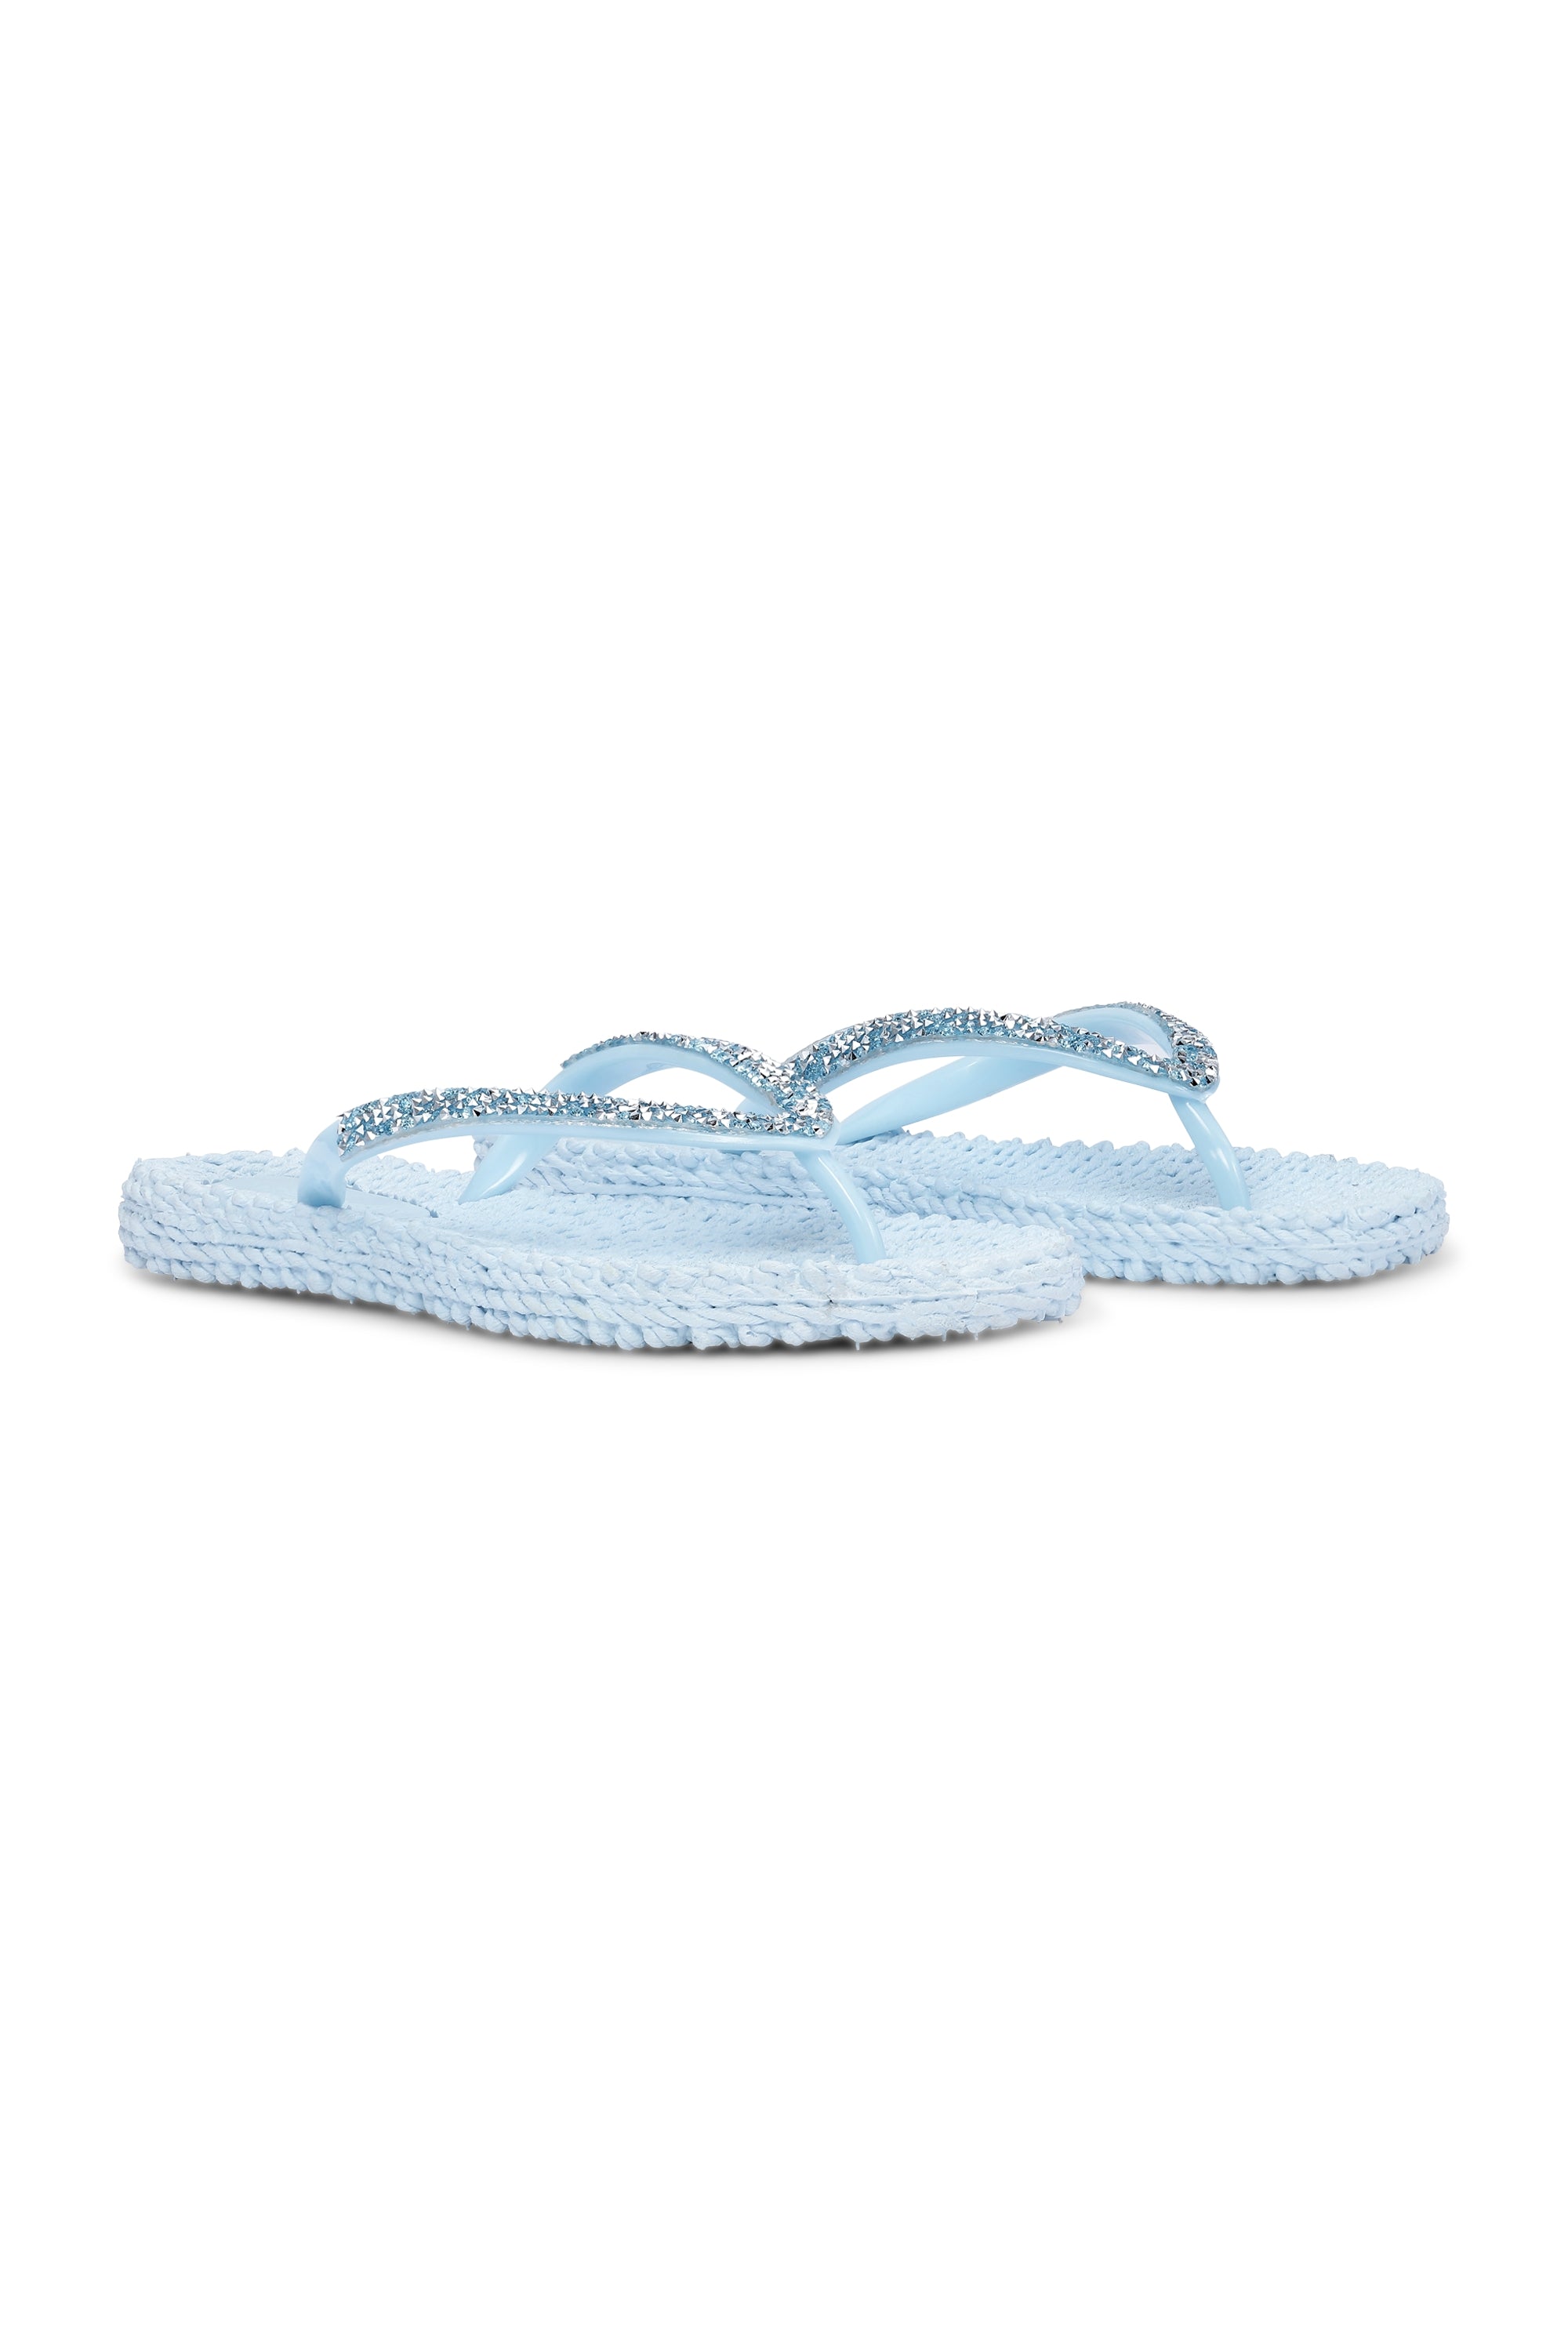 Flip Flop in color light blue with glitter strips by Ilse Jacobsen